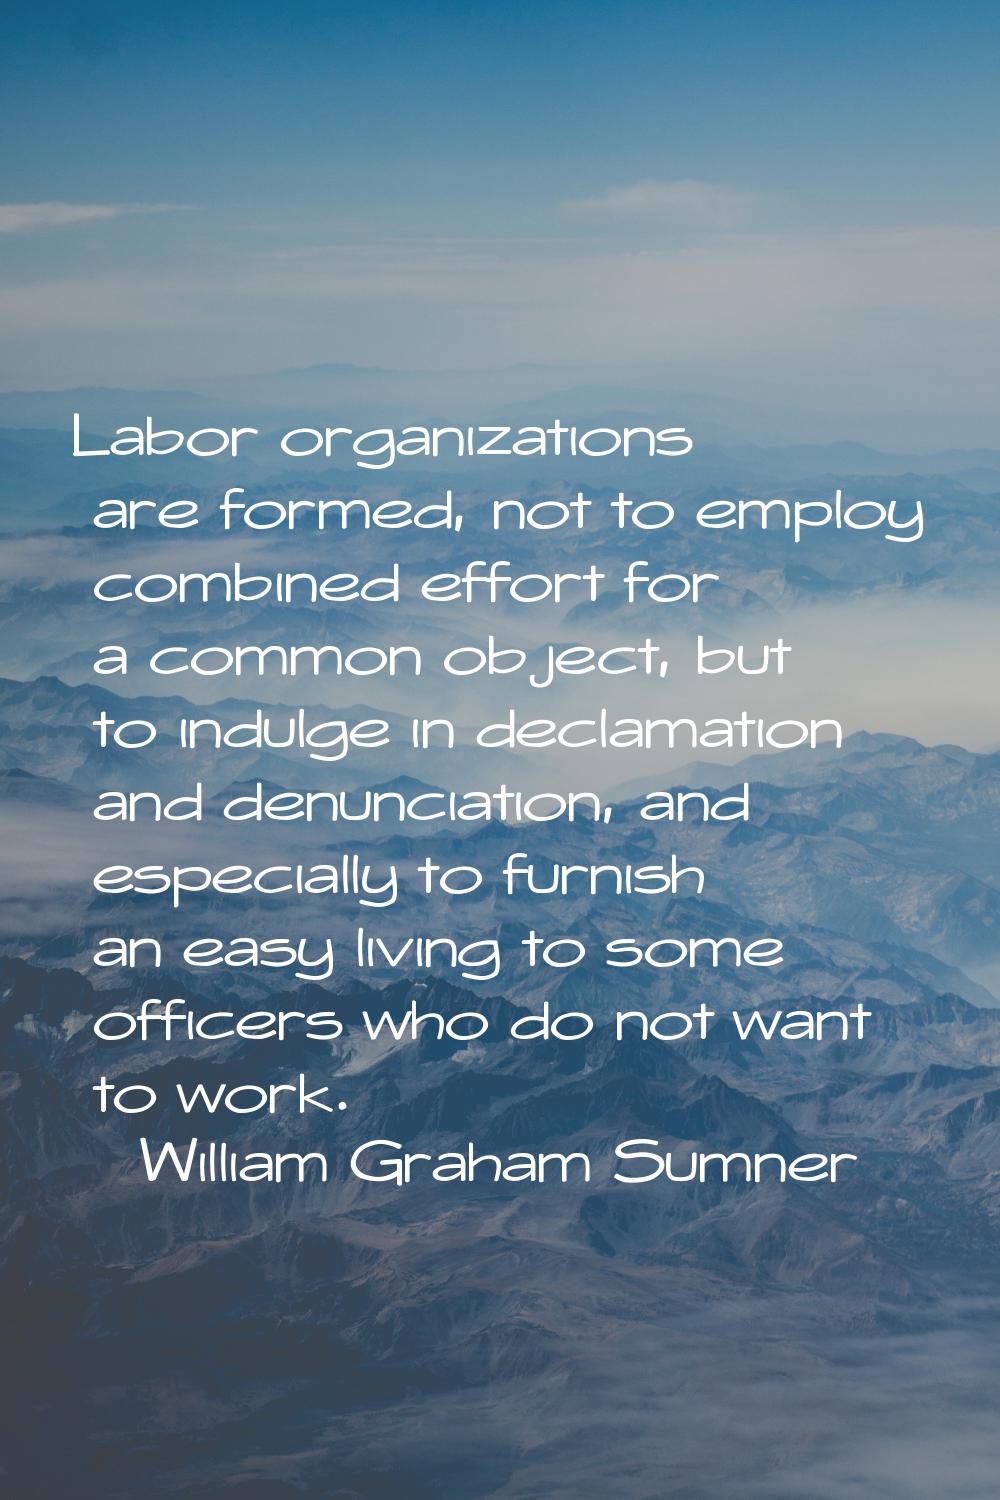 Labor organizations are formed, not to employ combined effort for a common object, but to indulge i